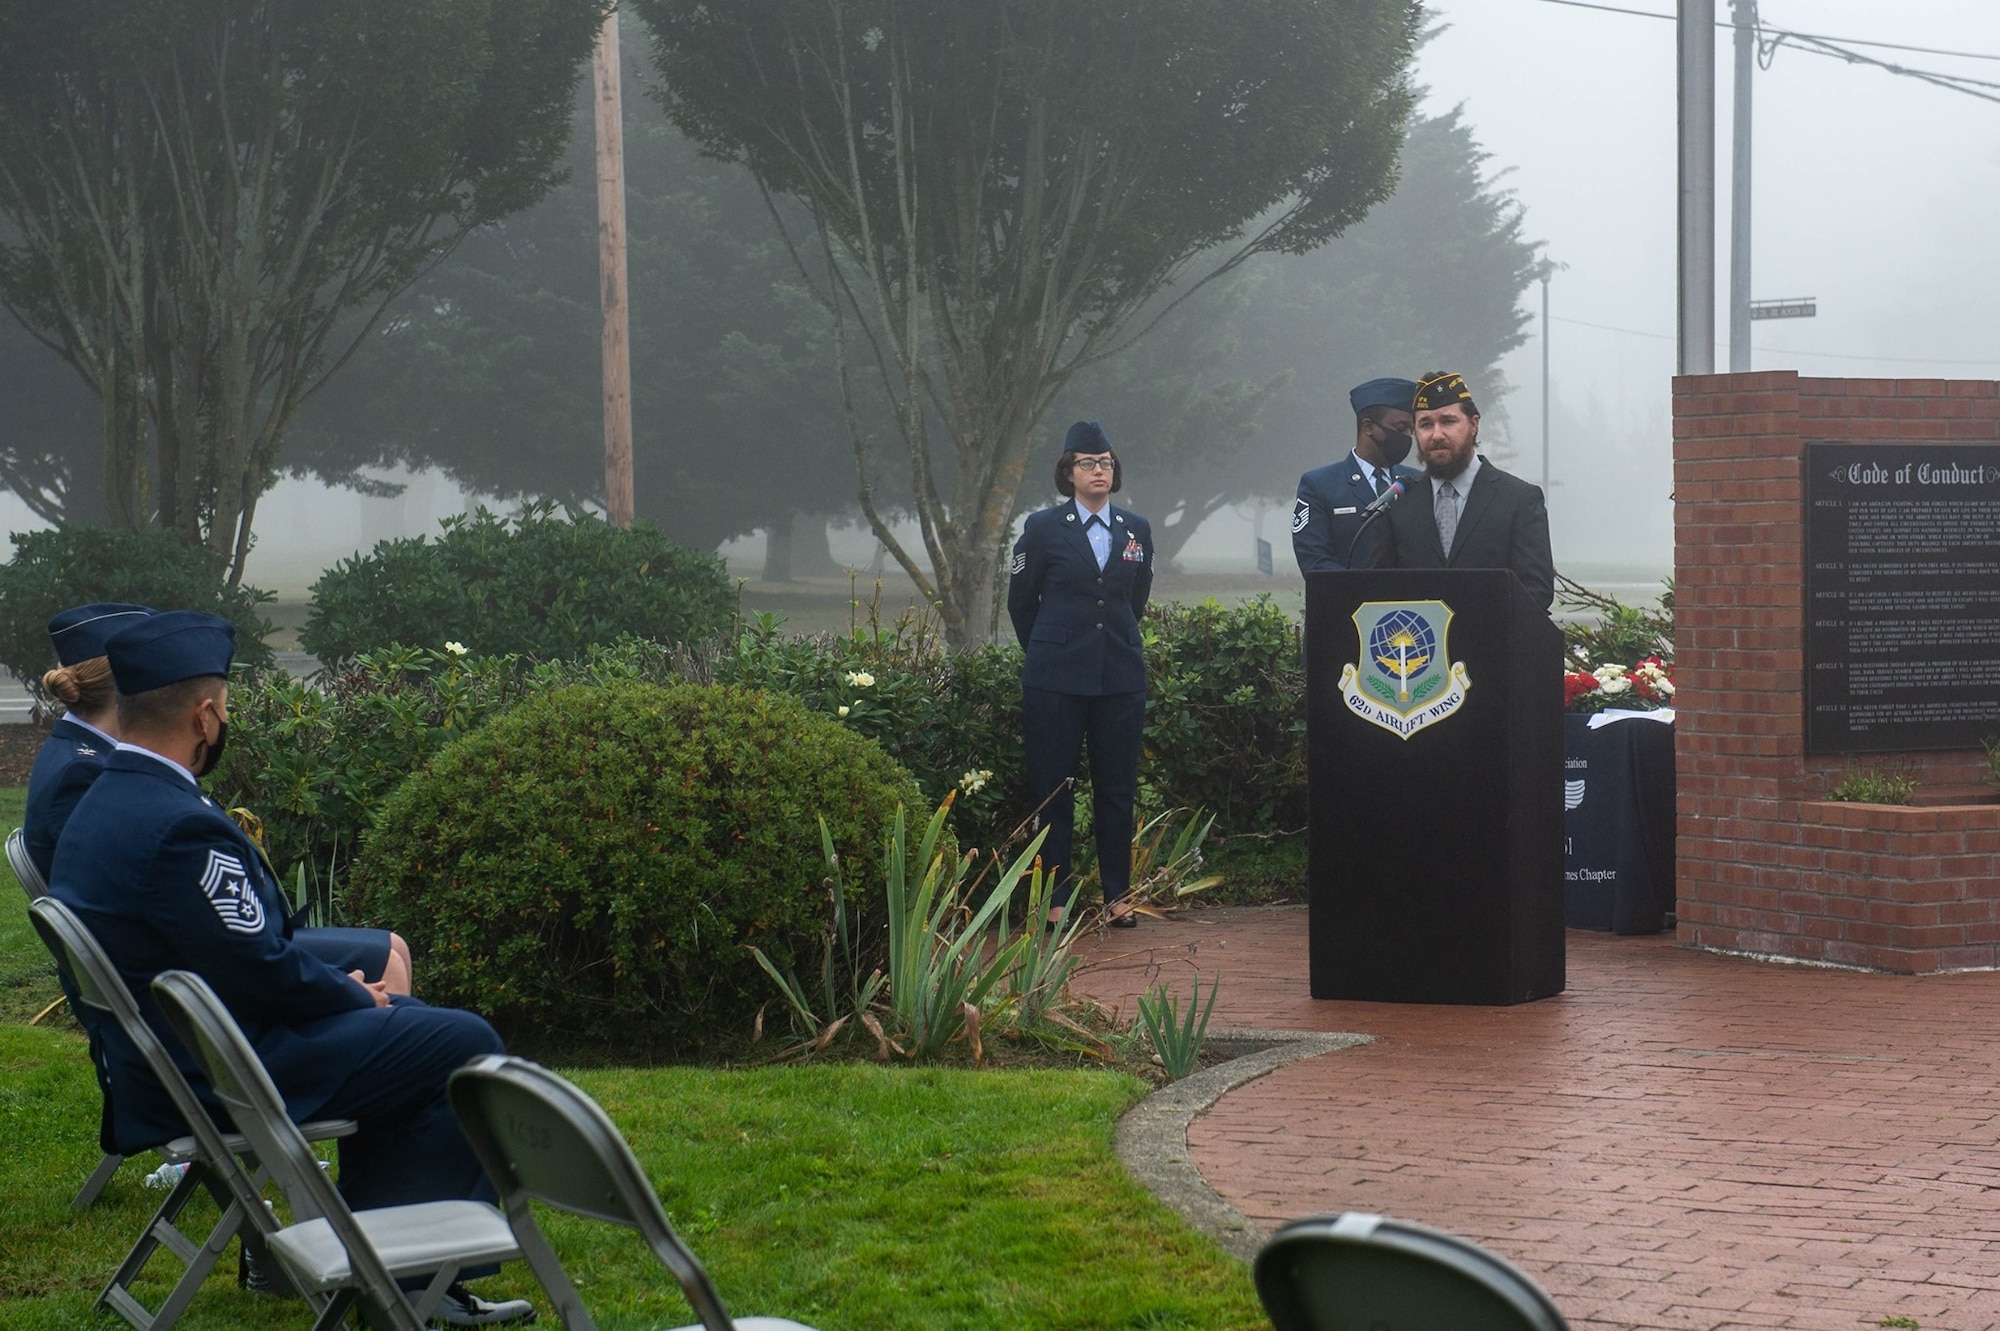 Retired Sgt. 1st Class Jason Paxton, vice president of Veterans of Foreign War Post 2329, speaks at a podium during a wreath laying ceremony honoring prisoners of war (POW) and service members missing in action (MIA)